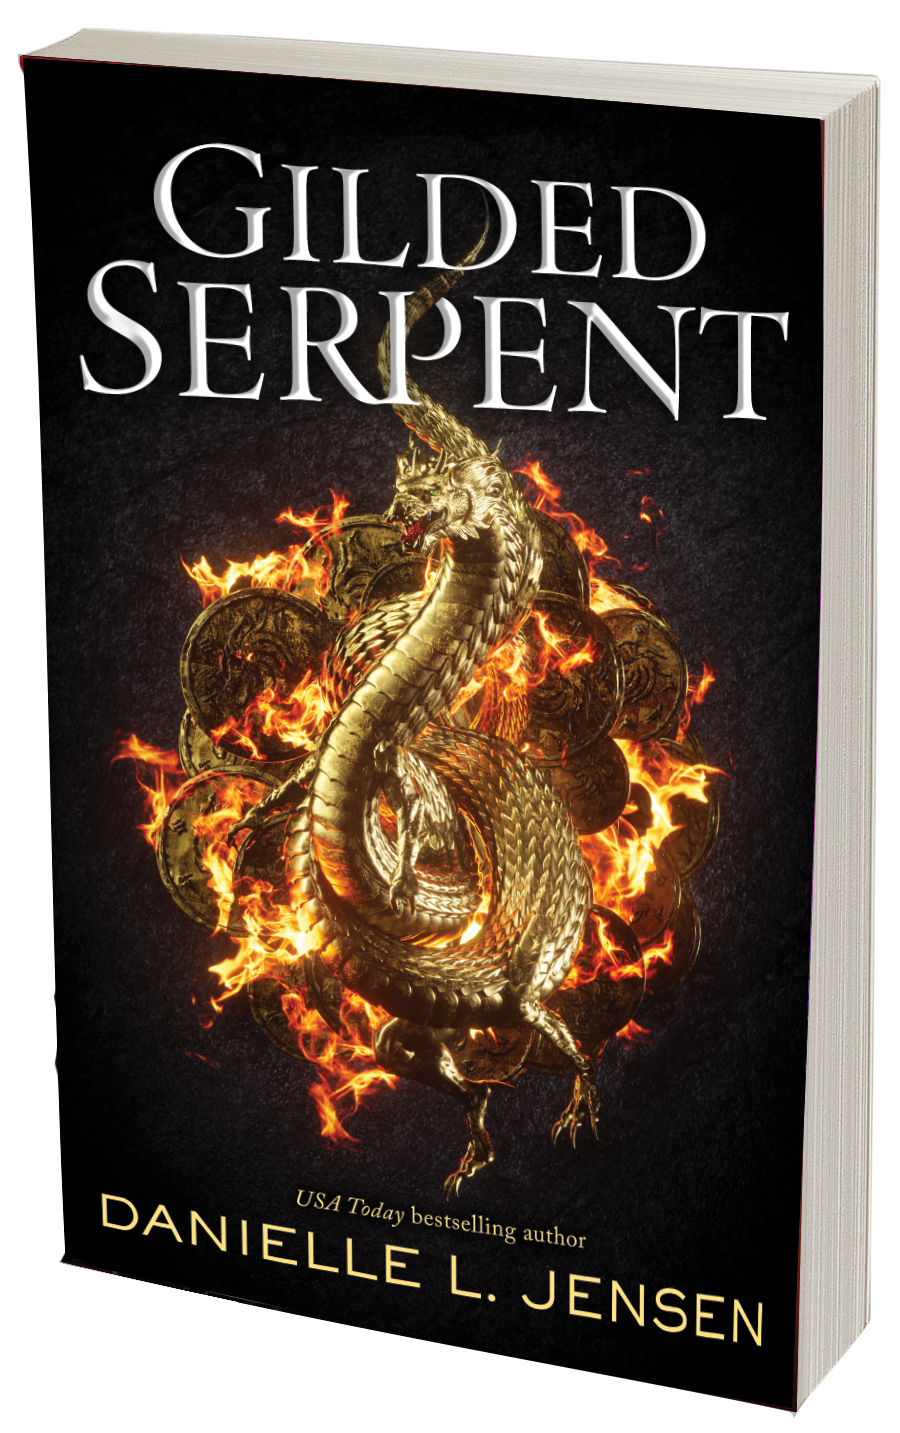 paperback cover of Gilded Serpent by Danielle L. Jensen